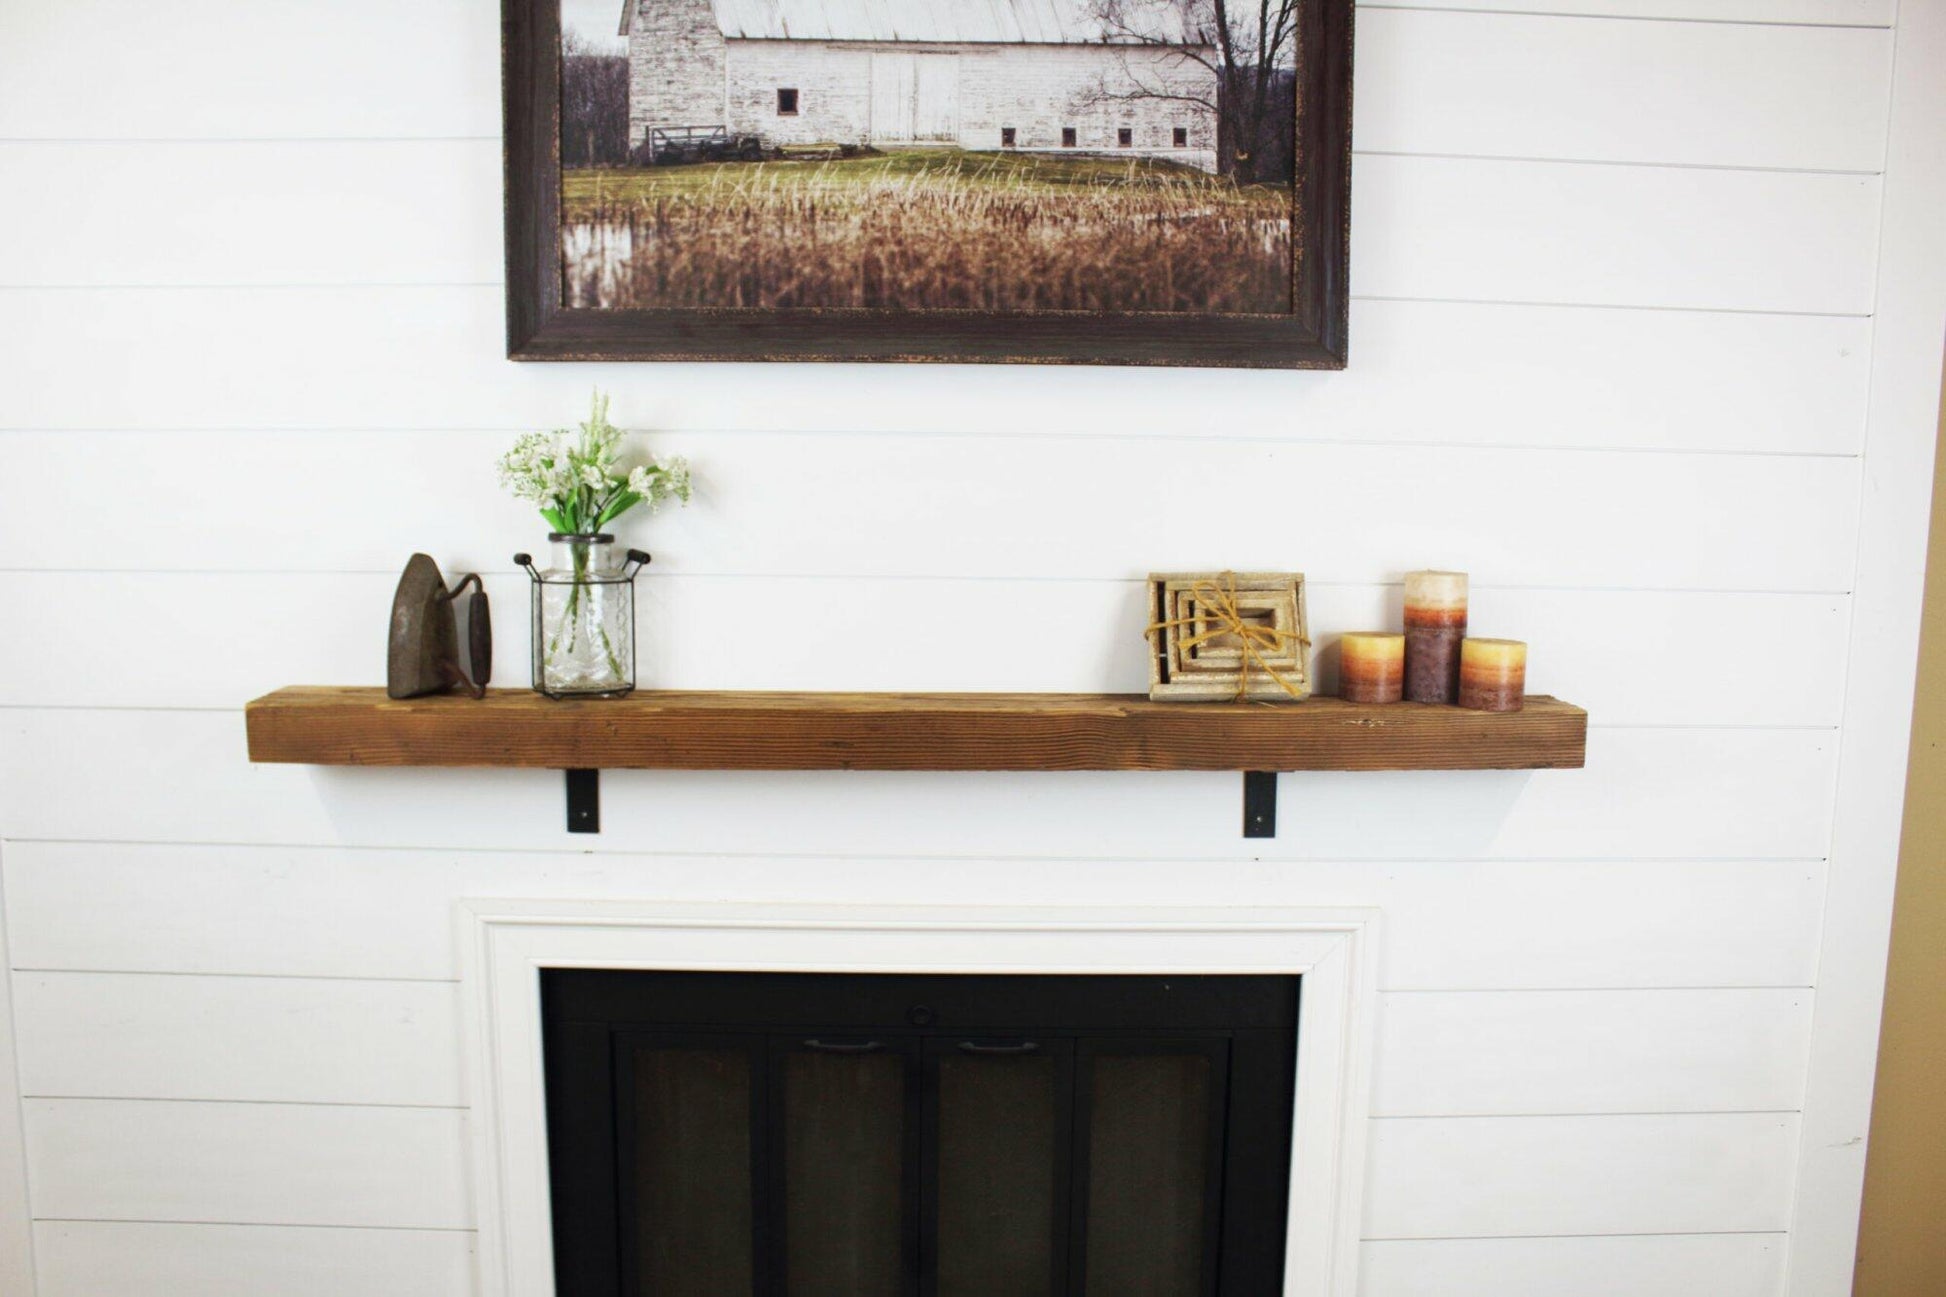 a skip-planed reclaimed barnwood fireplace mantel in the natural finish.